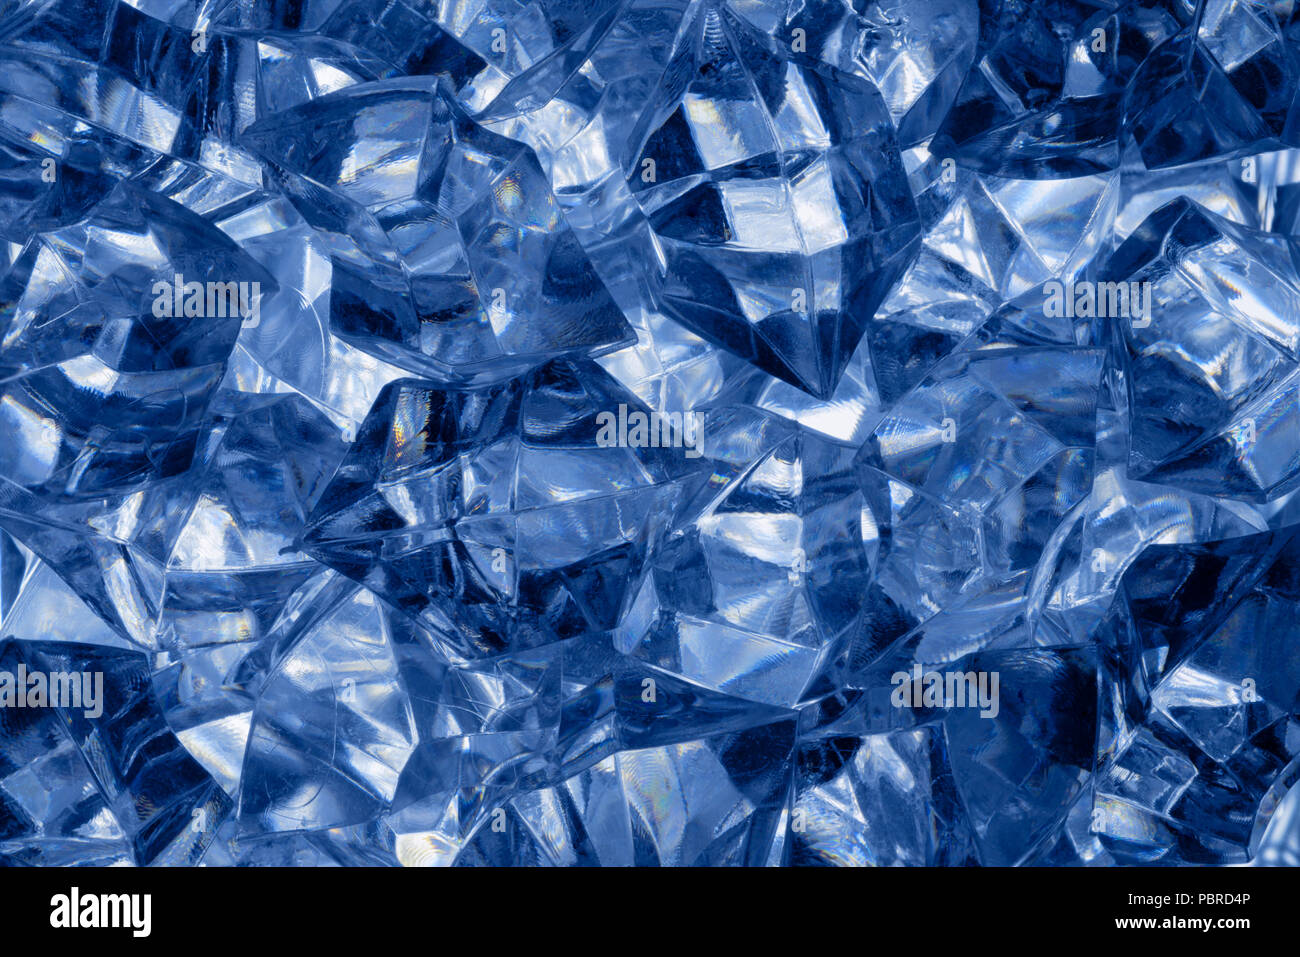 Backgrounds and textures: big heap of crushed ice, closeup shot, abstract background Stock Photo